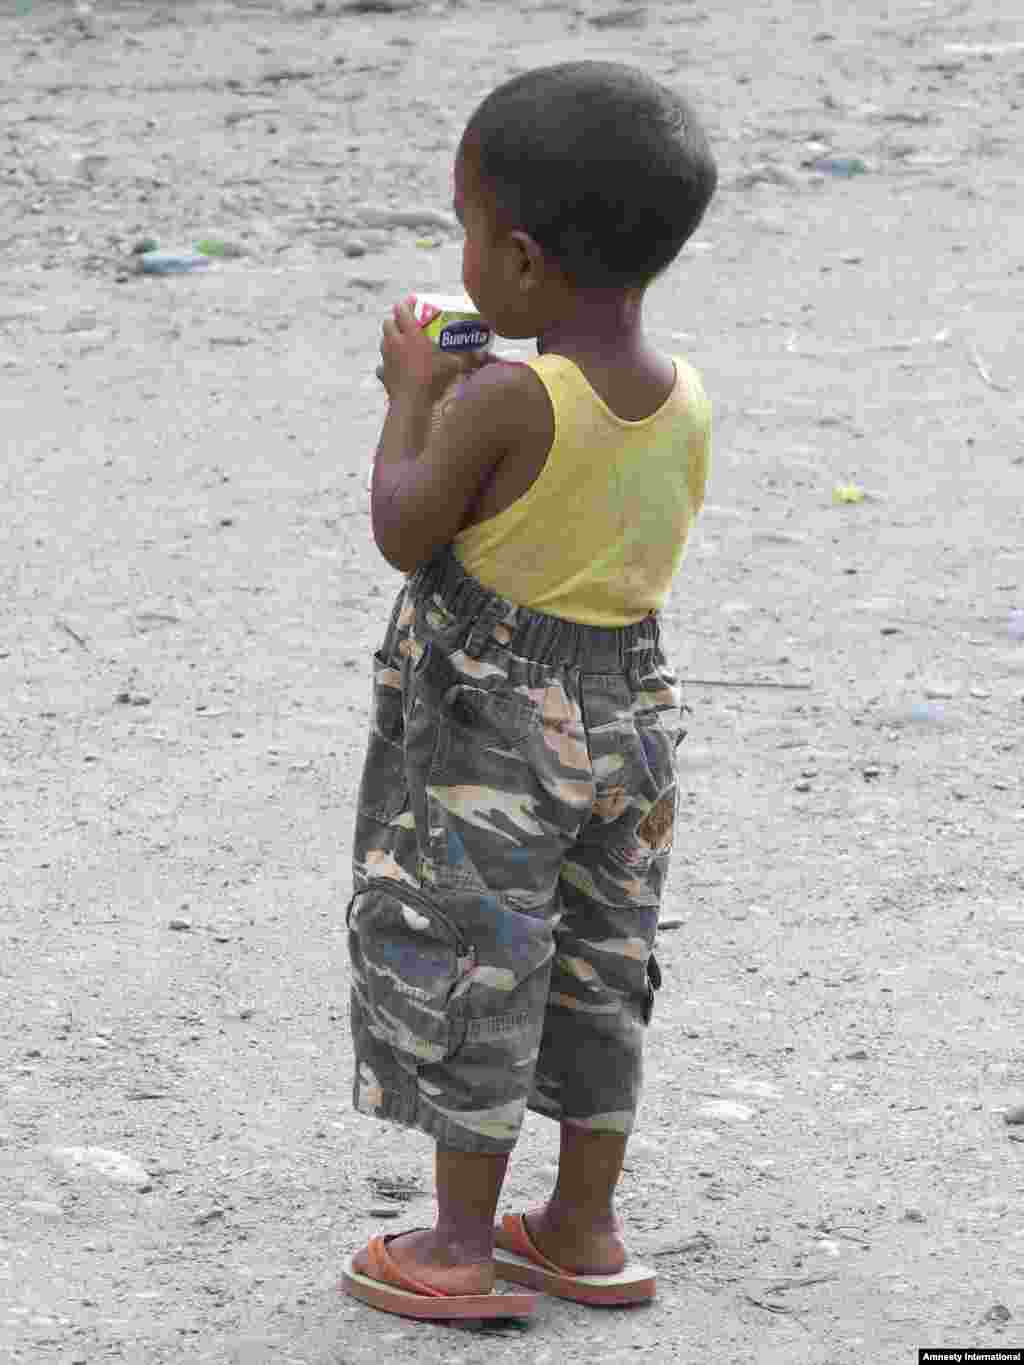 A Rohingya child in Aceh.